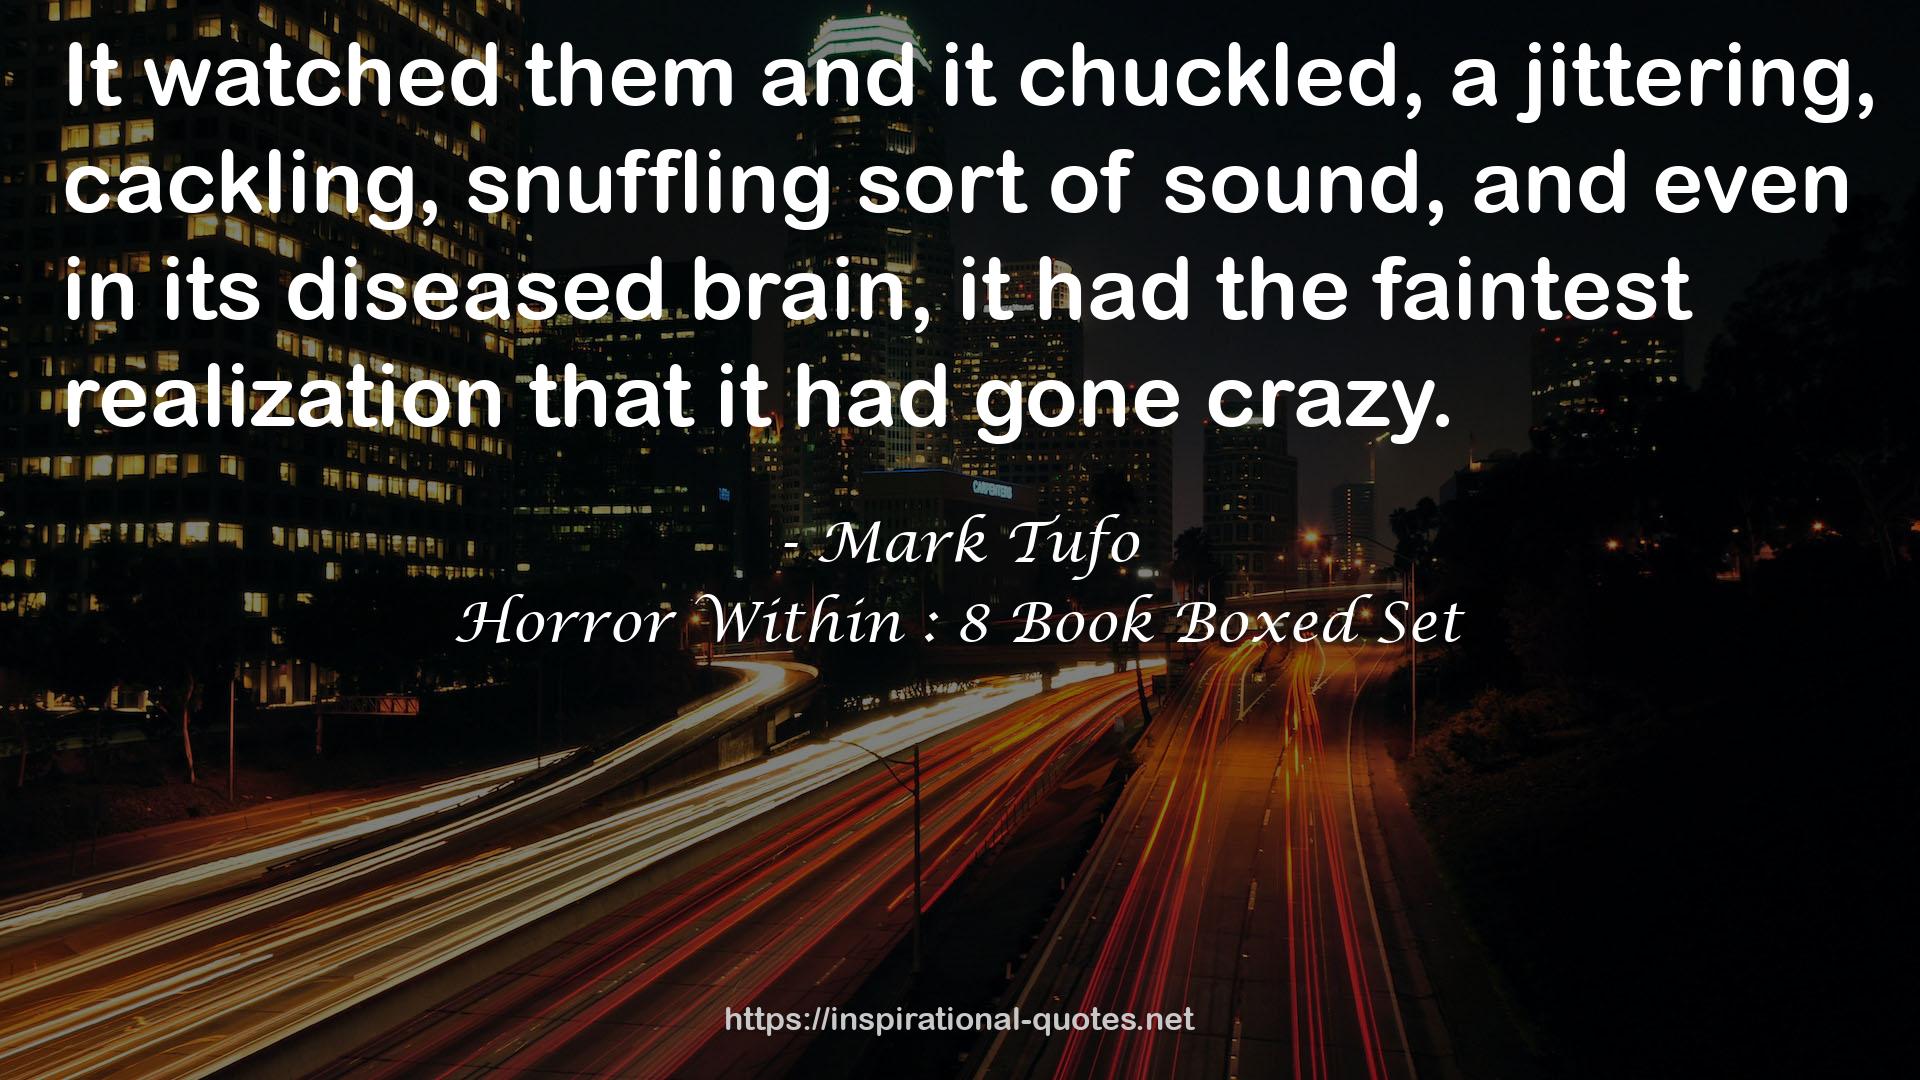 Horror Within : 8 Book Boxed Set QUOTES